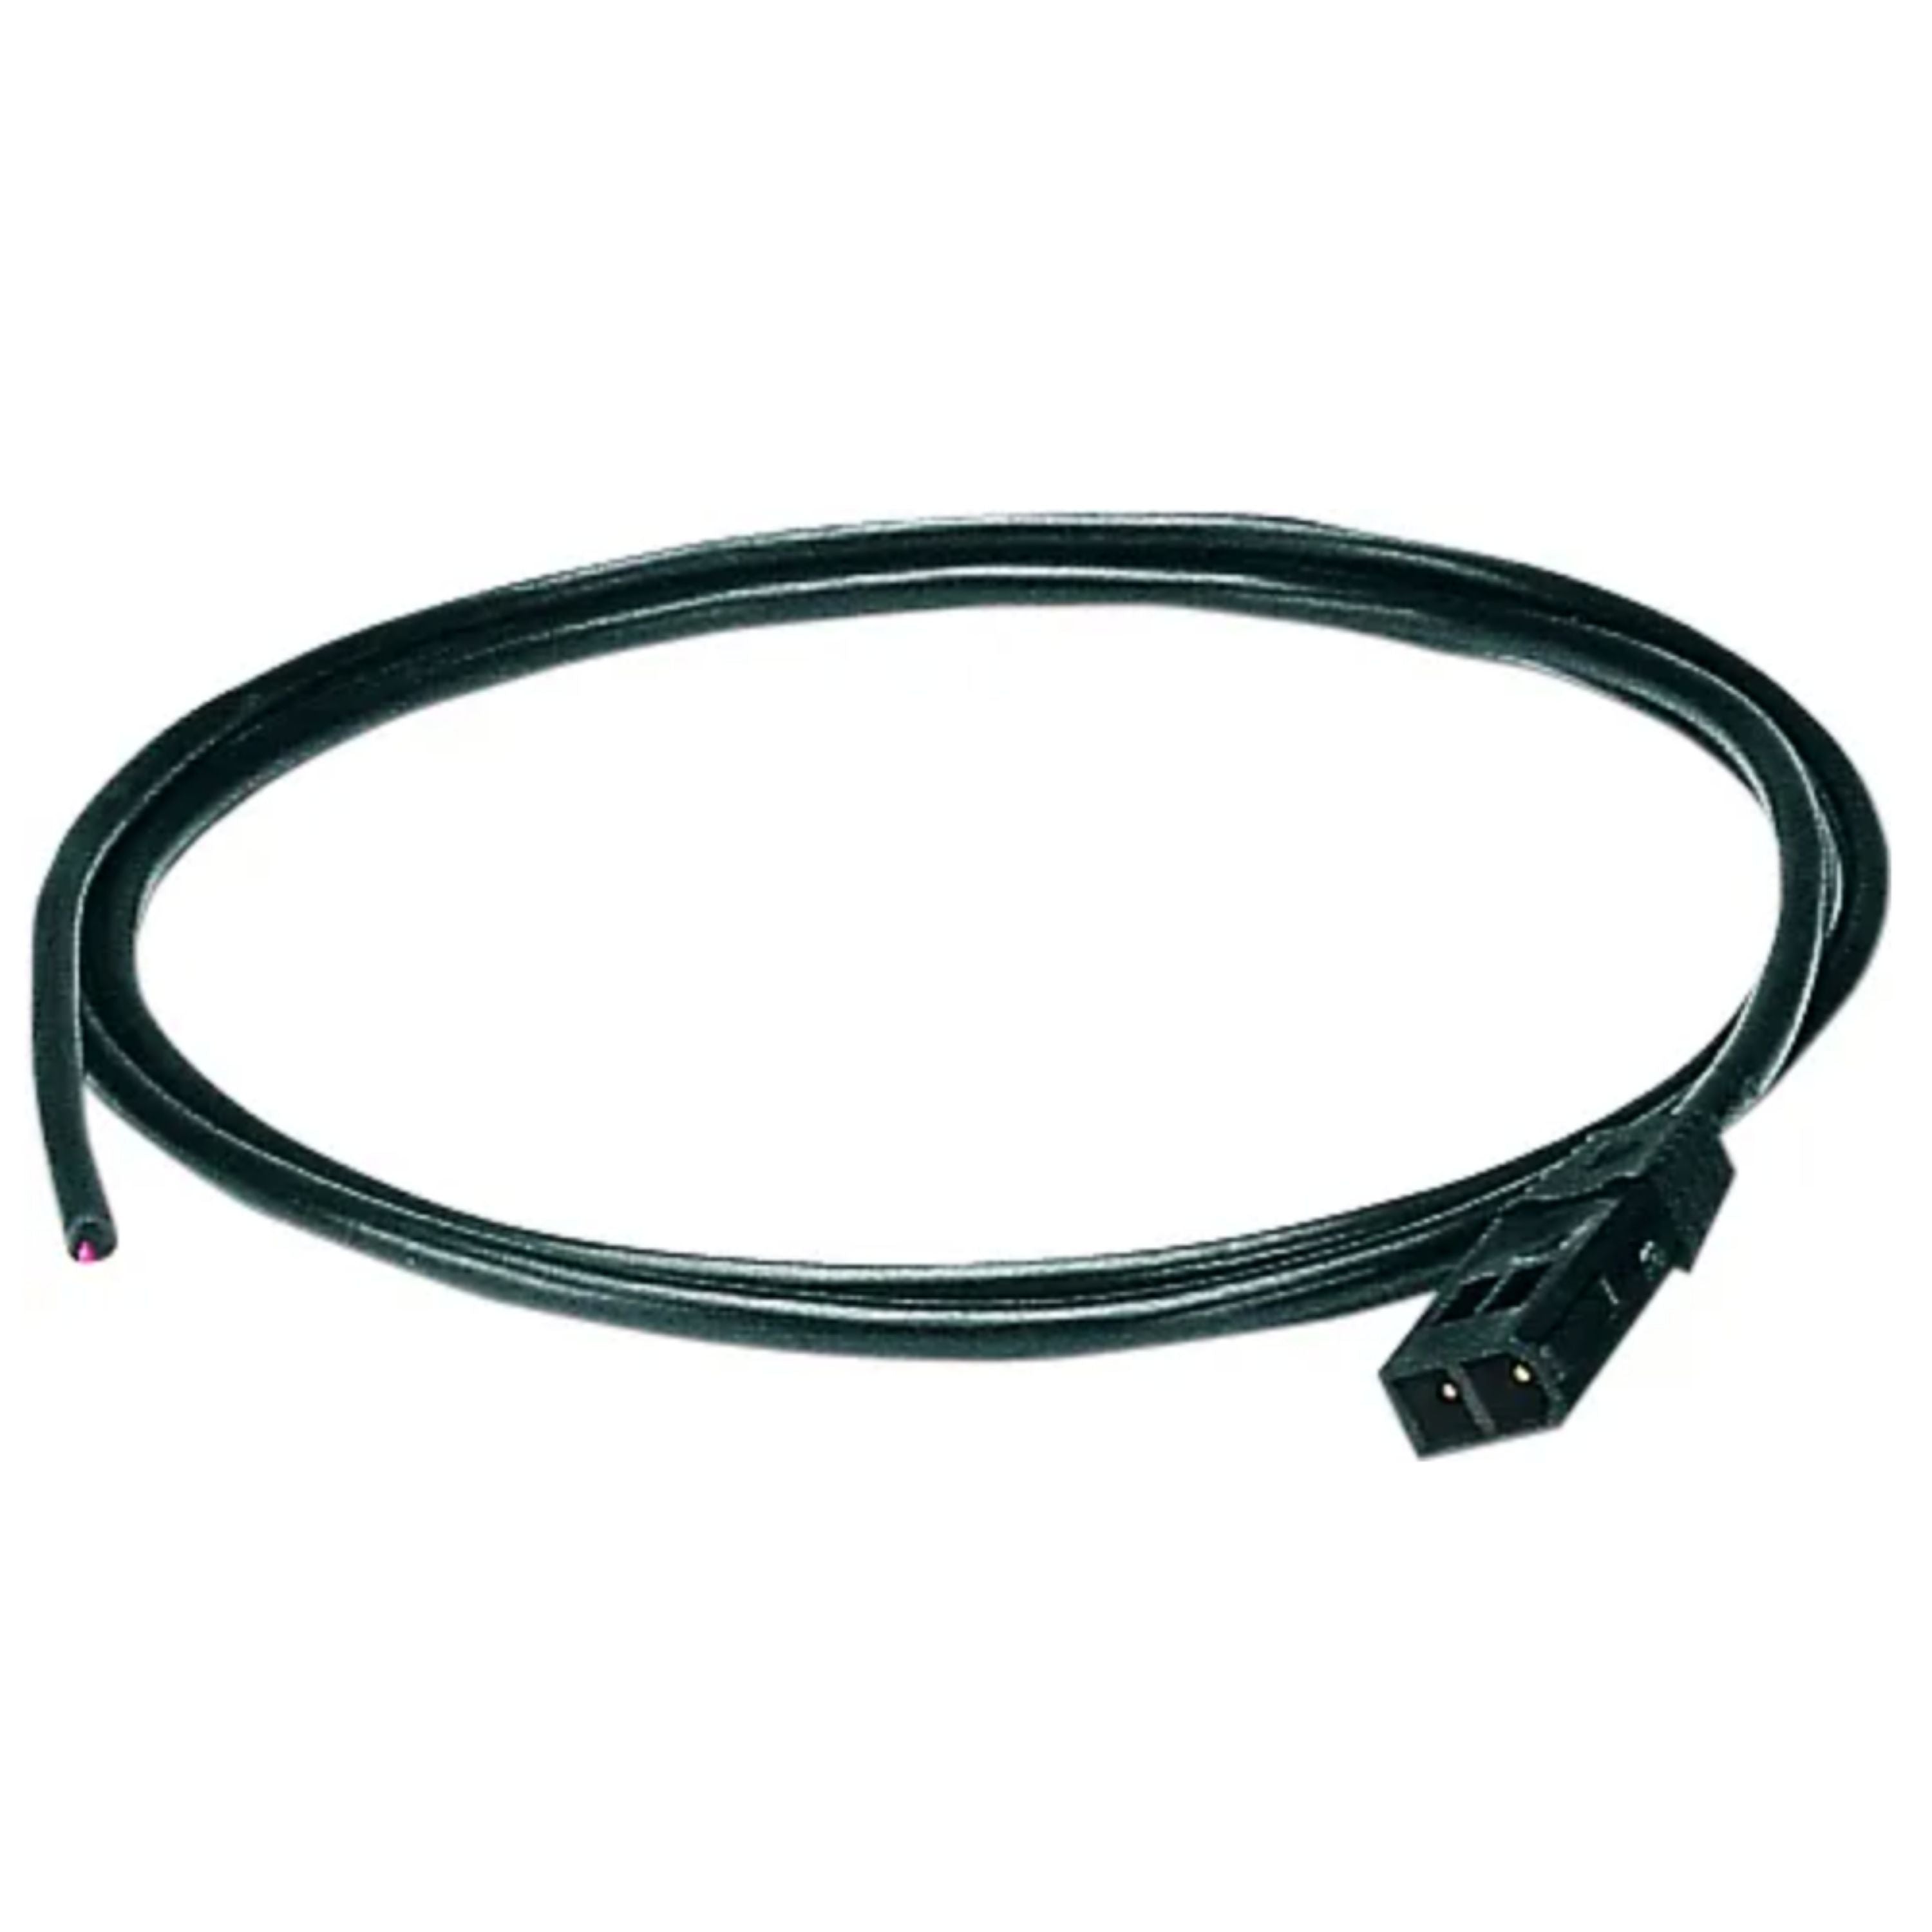 PC-10 Power cable - 6 ft